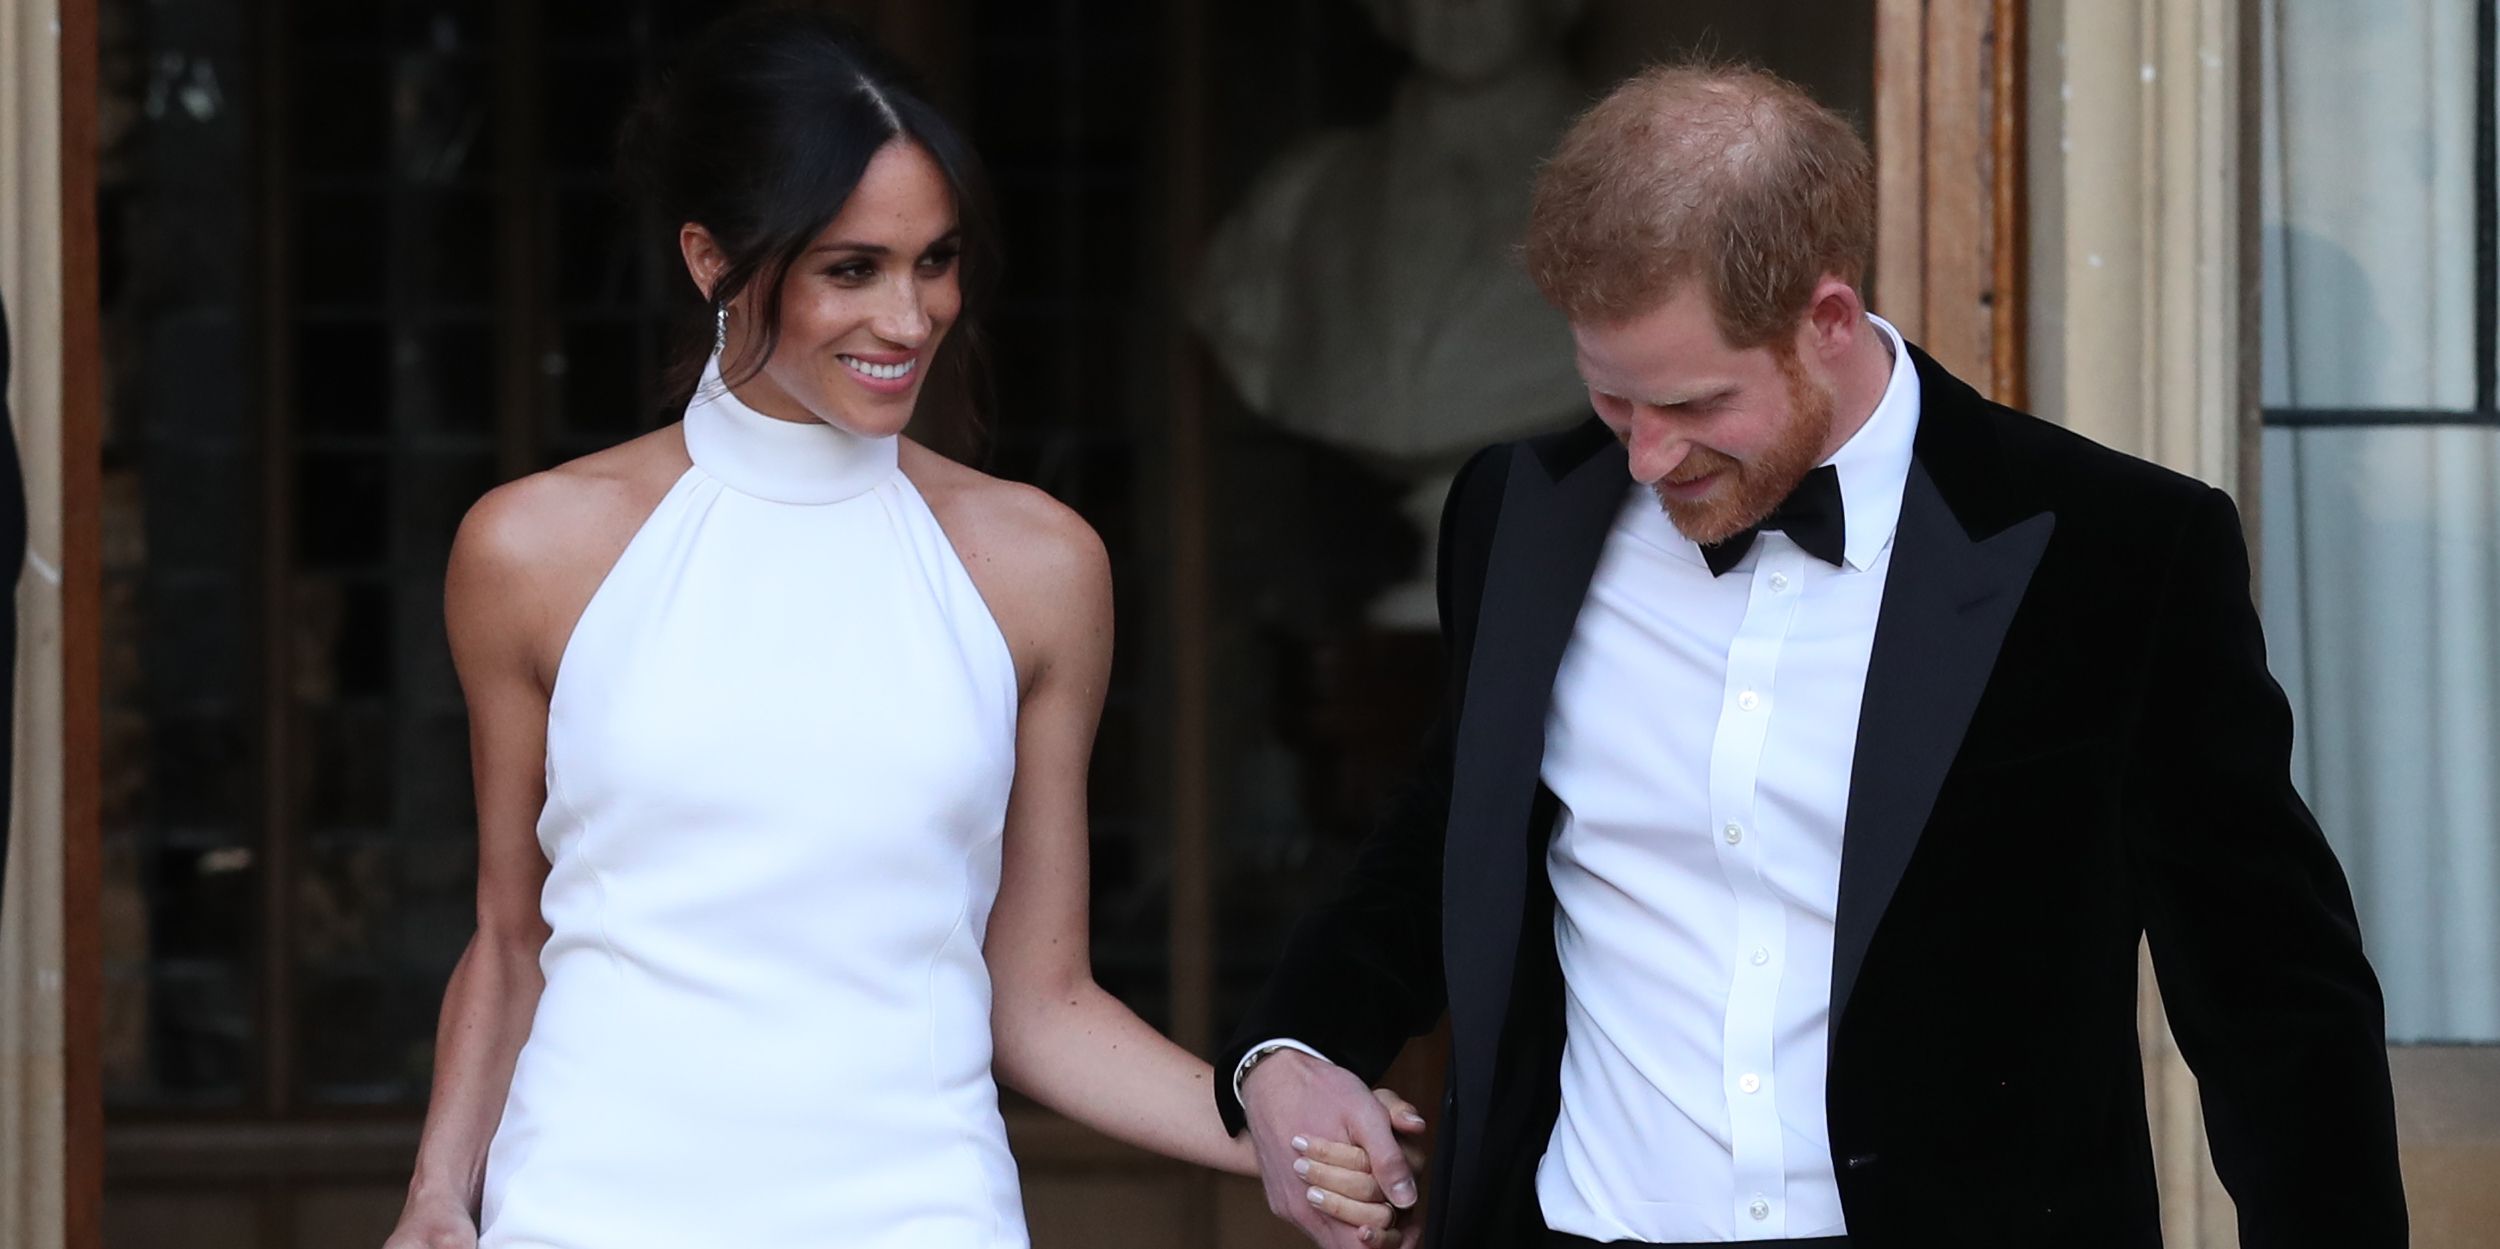 meghan markle wedding after party dress